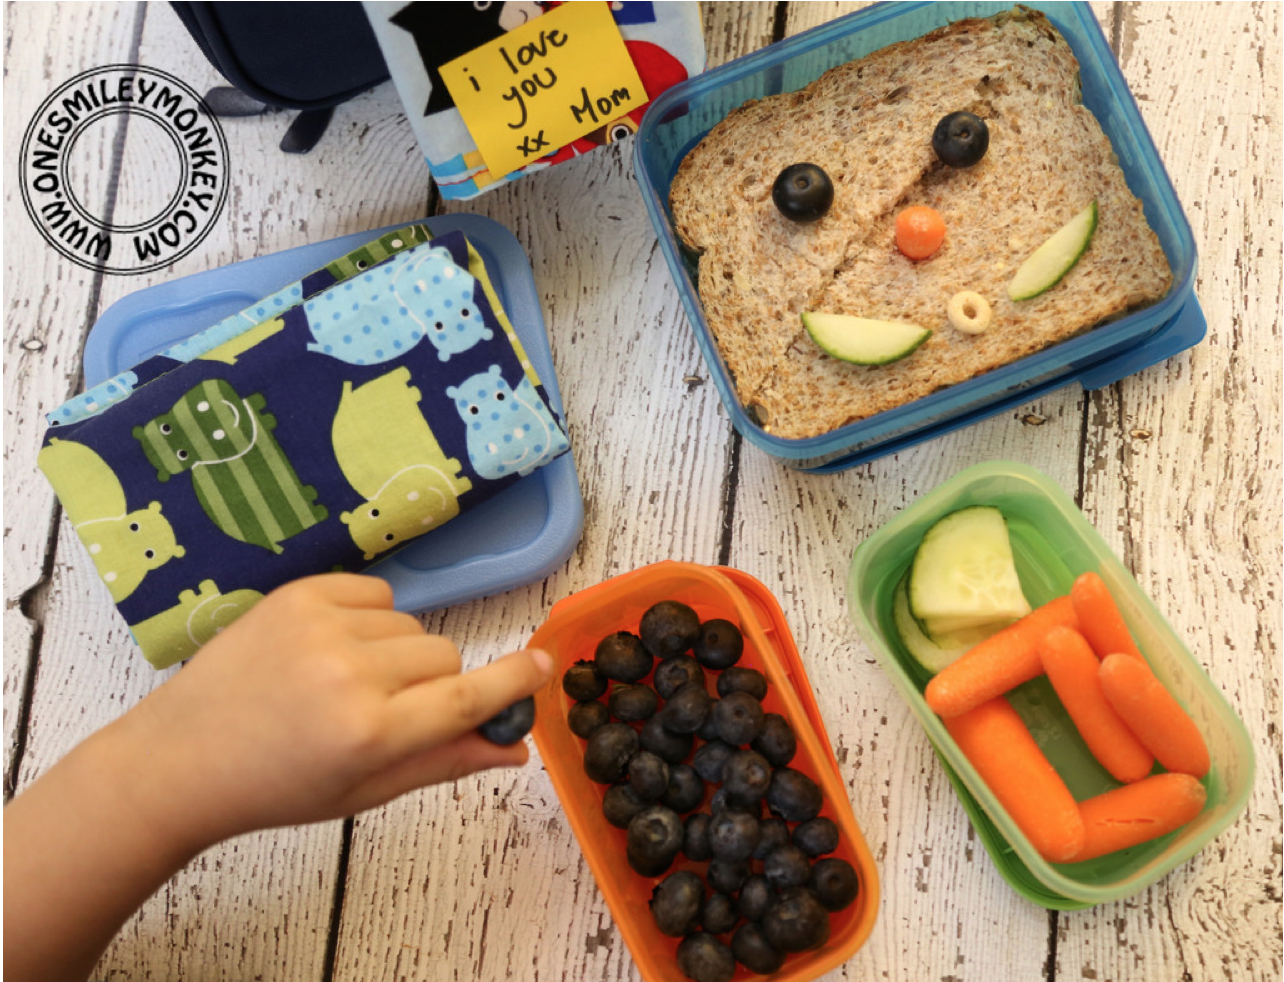 Picking the Best Lunch and Snack Containers for School